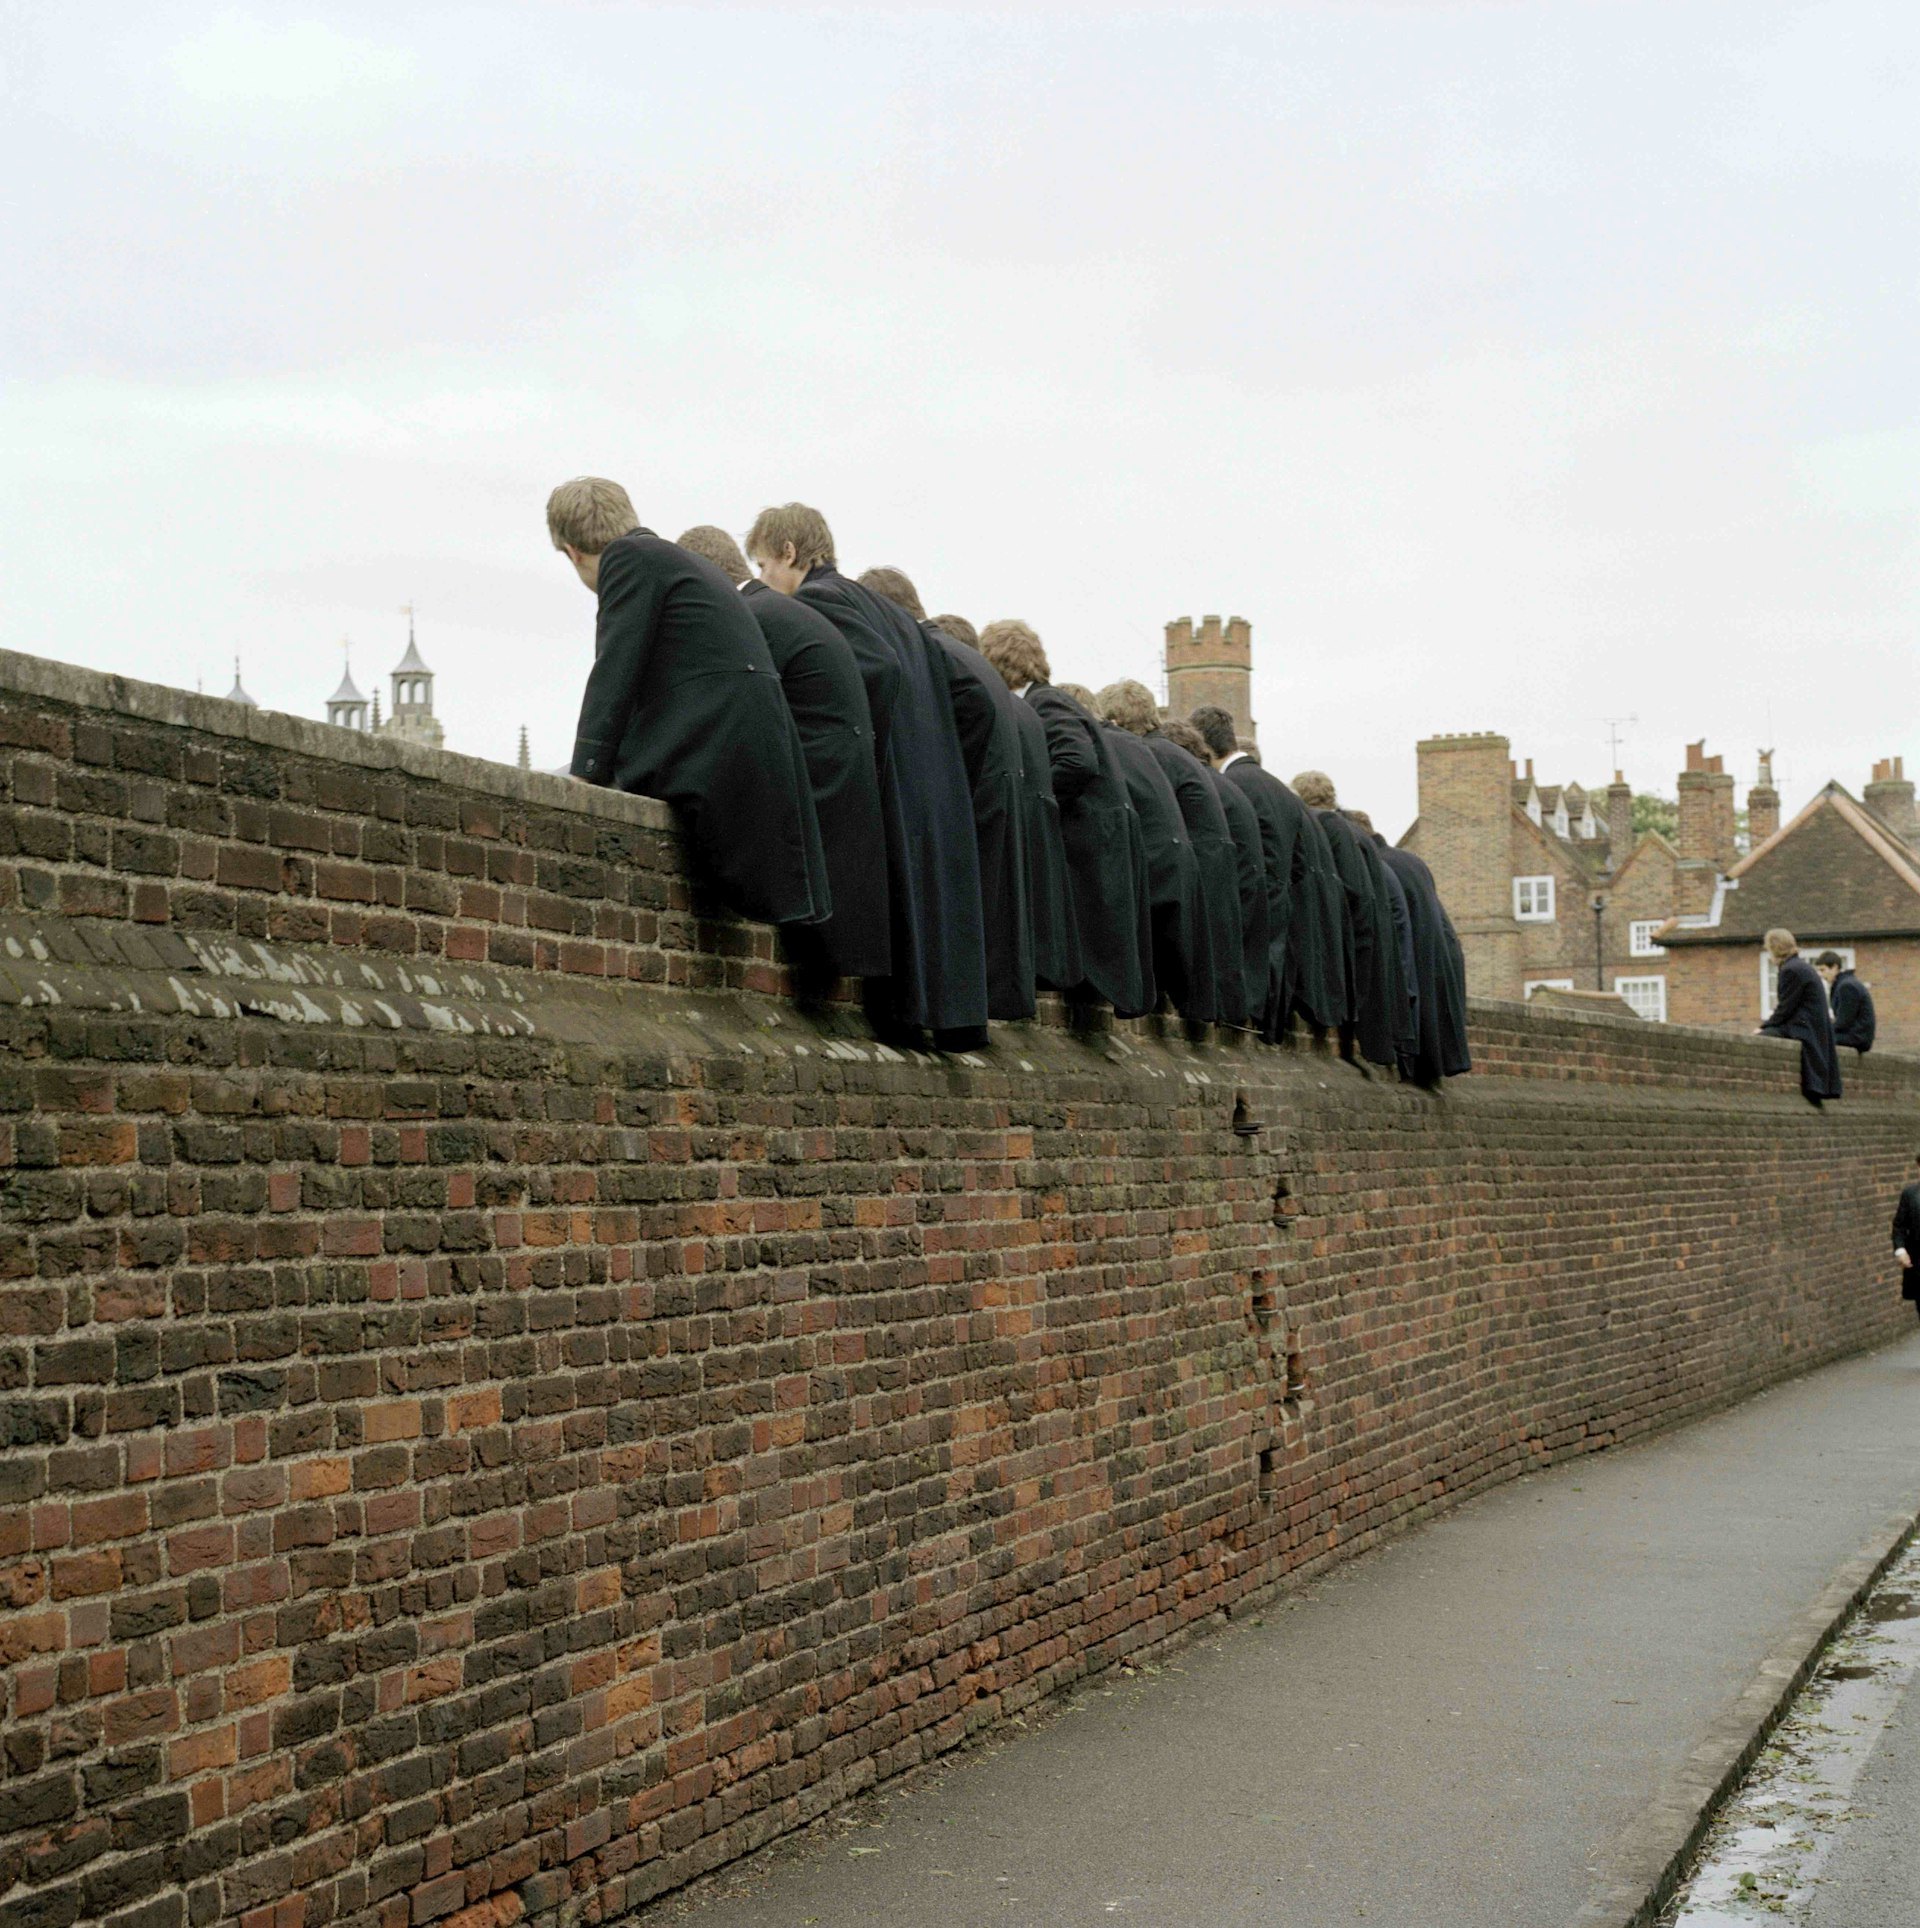 GB. Windsor. Eton School. The Eton Wall Game, a vigorous hybrid of rugby union and football played since 1766 on Ascension Day between two opposing teams of students. © Peter Marlow // Magnum Photos